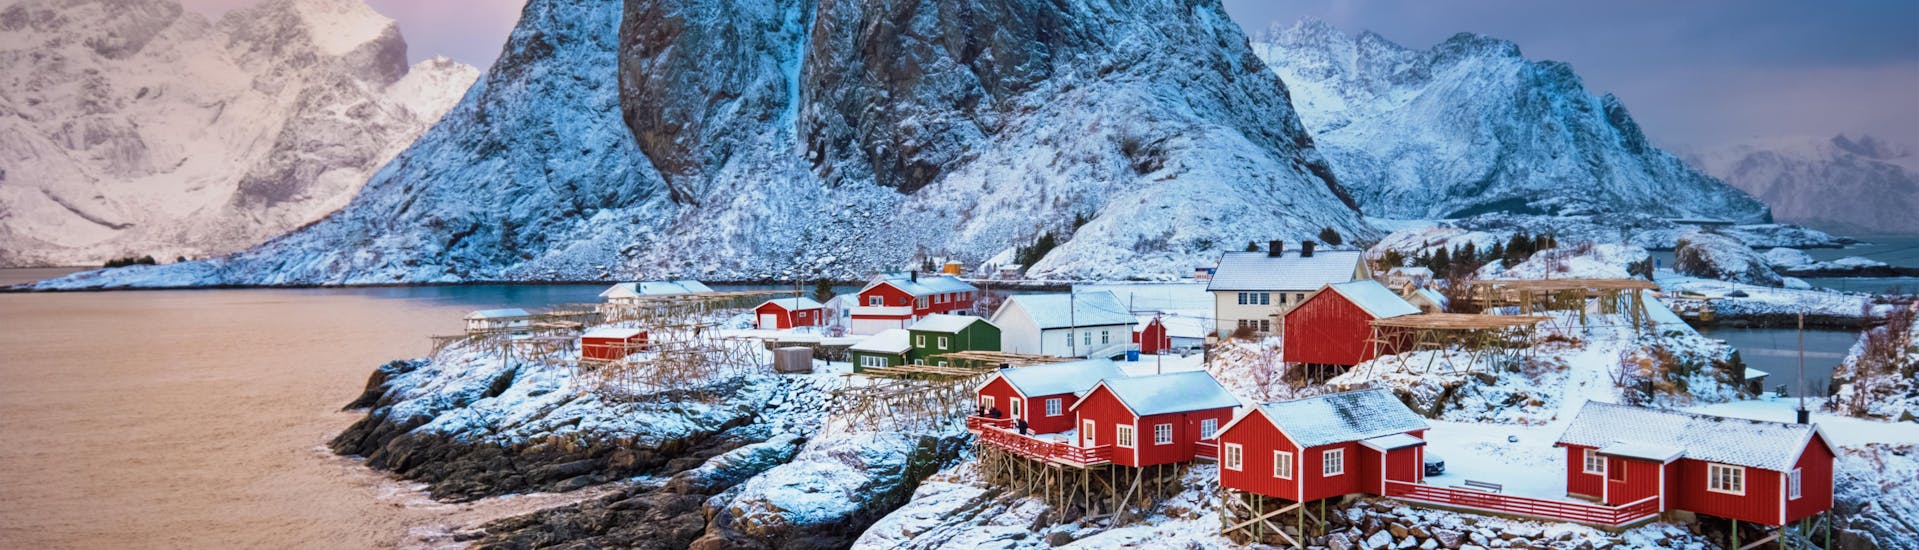 View of a small fishing village on the Lofoten Islands in Arctic Norway, where boat trips allow visitors to marvel at the spectacular fjords.